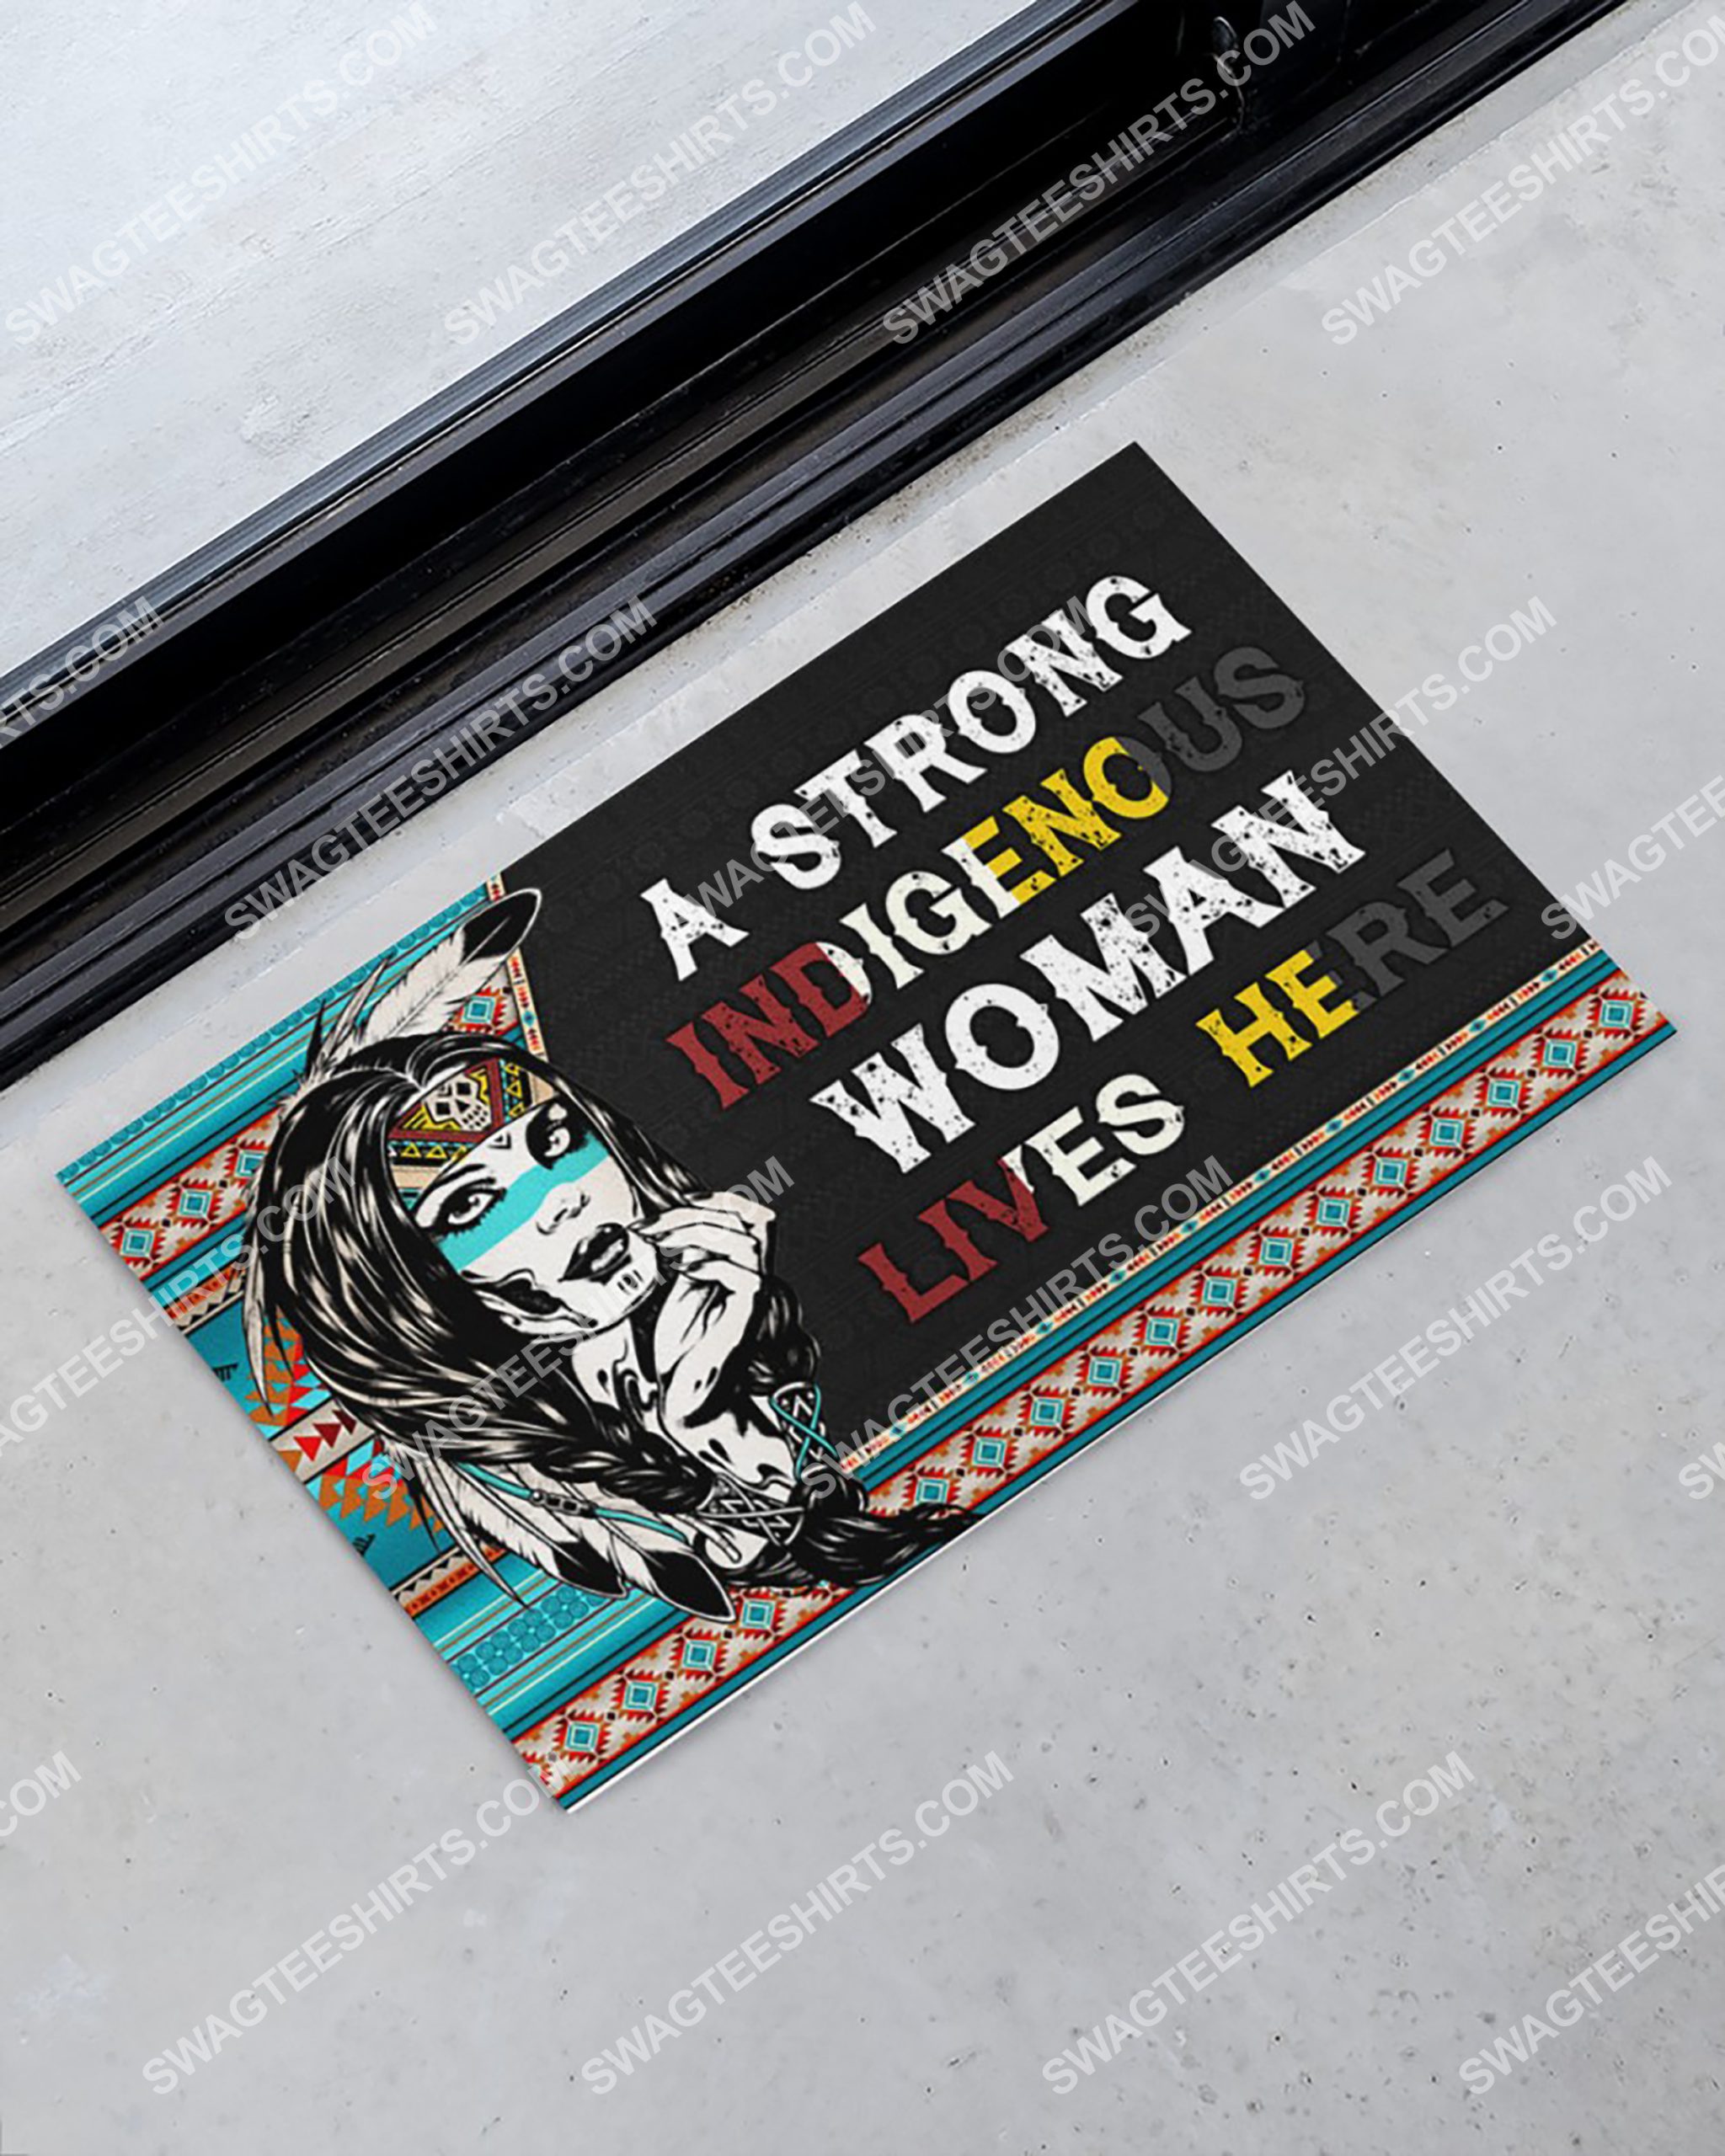 native american a strong indigenous woman lives here doormat 3(1)